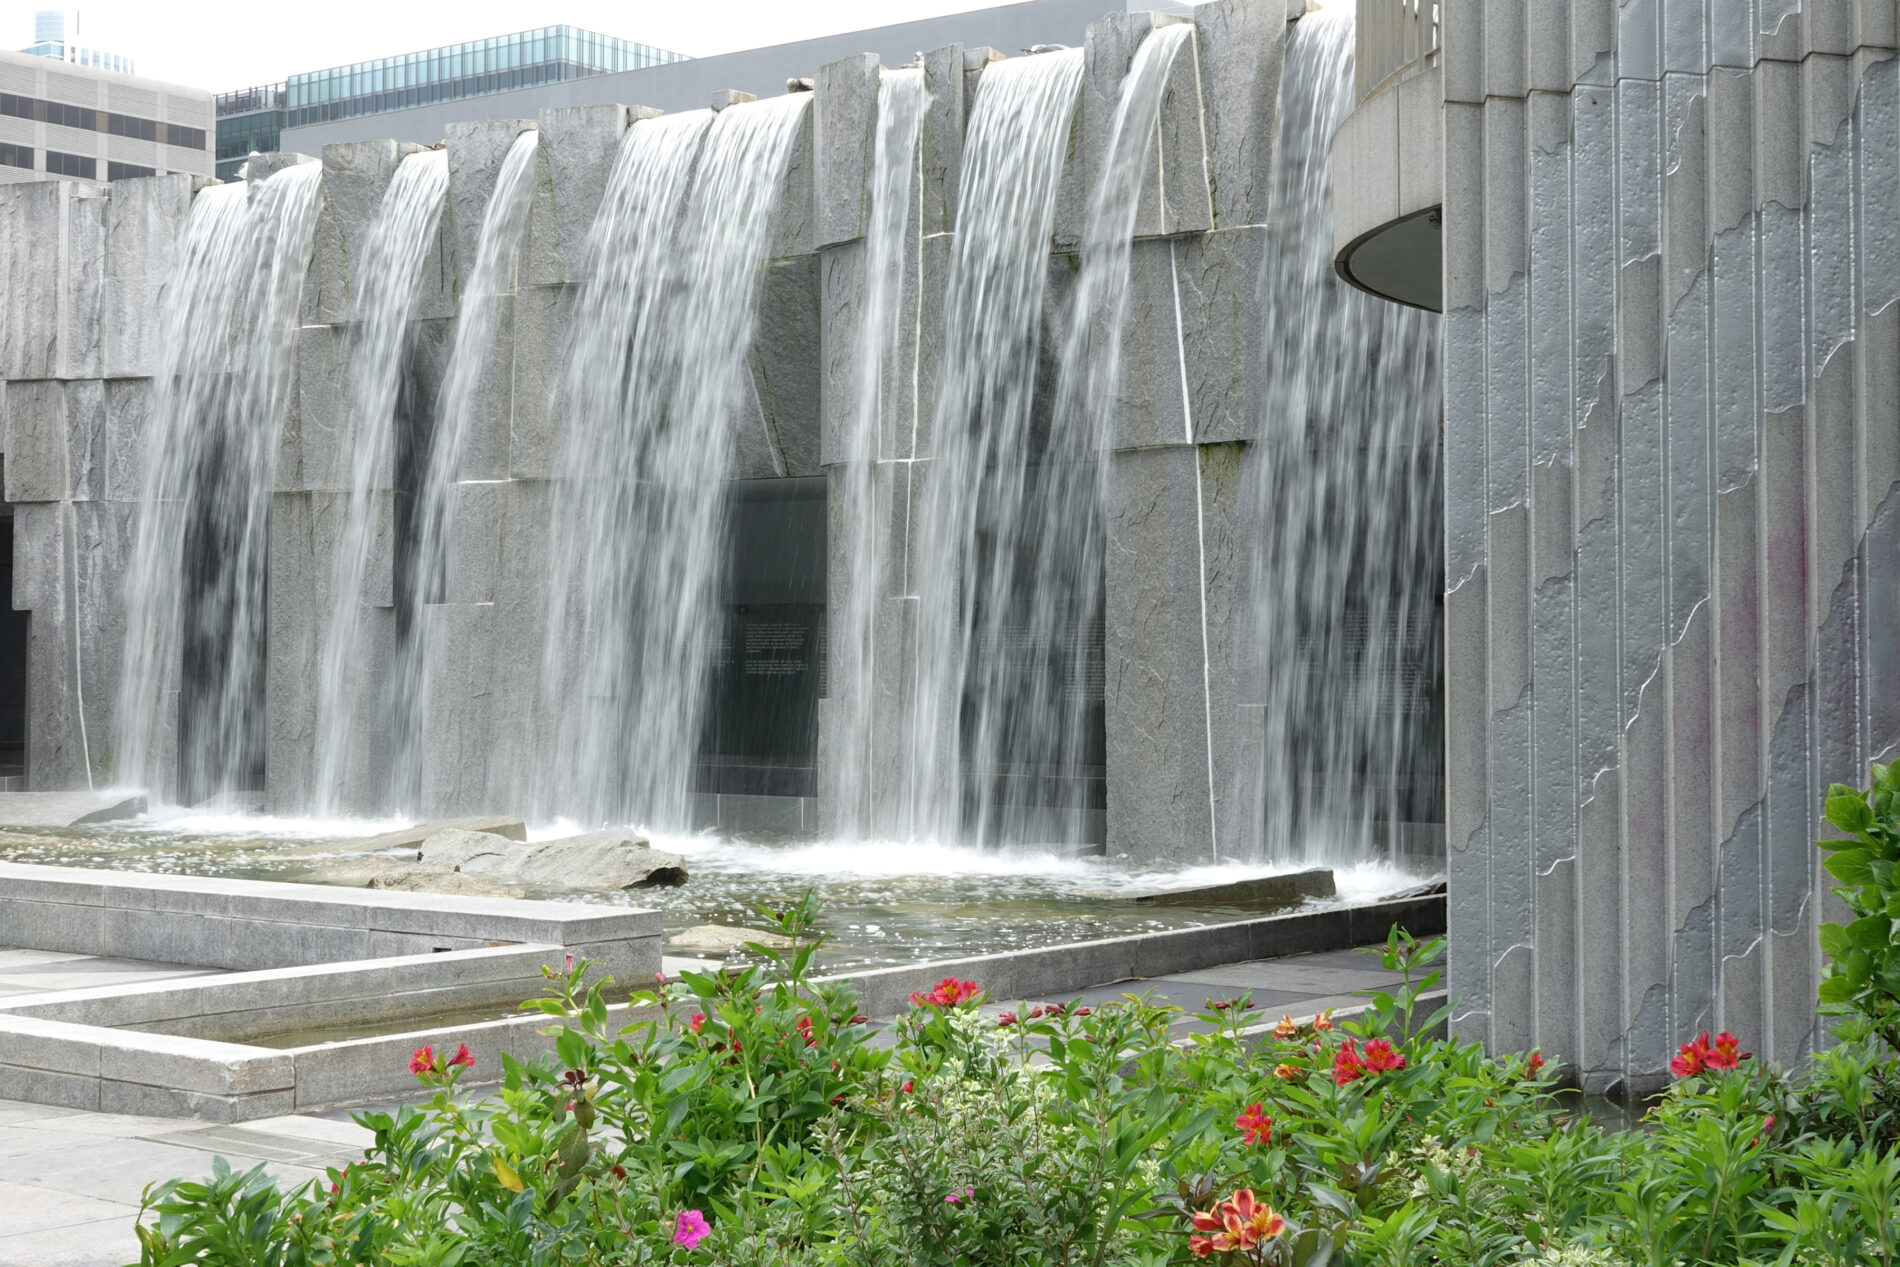 A waterfall in Yerba Buena Gardens honoring Dr. Martin Luther King. His vision of peace and unity is behind the falls.